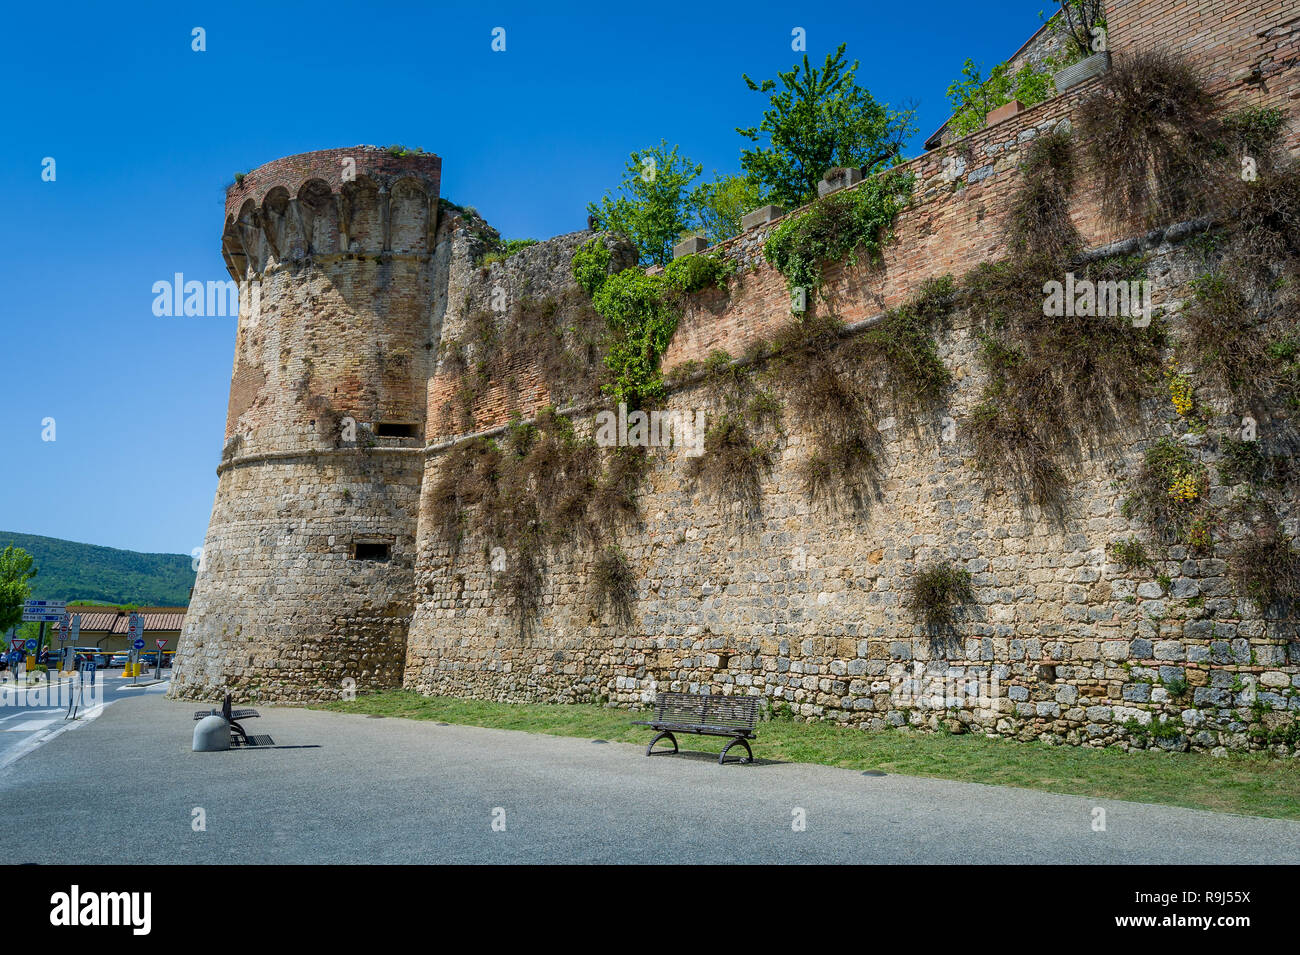 Outer fortress walls of San Gimignano fortress and comune. Tuscany, Italy. Stock Photo